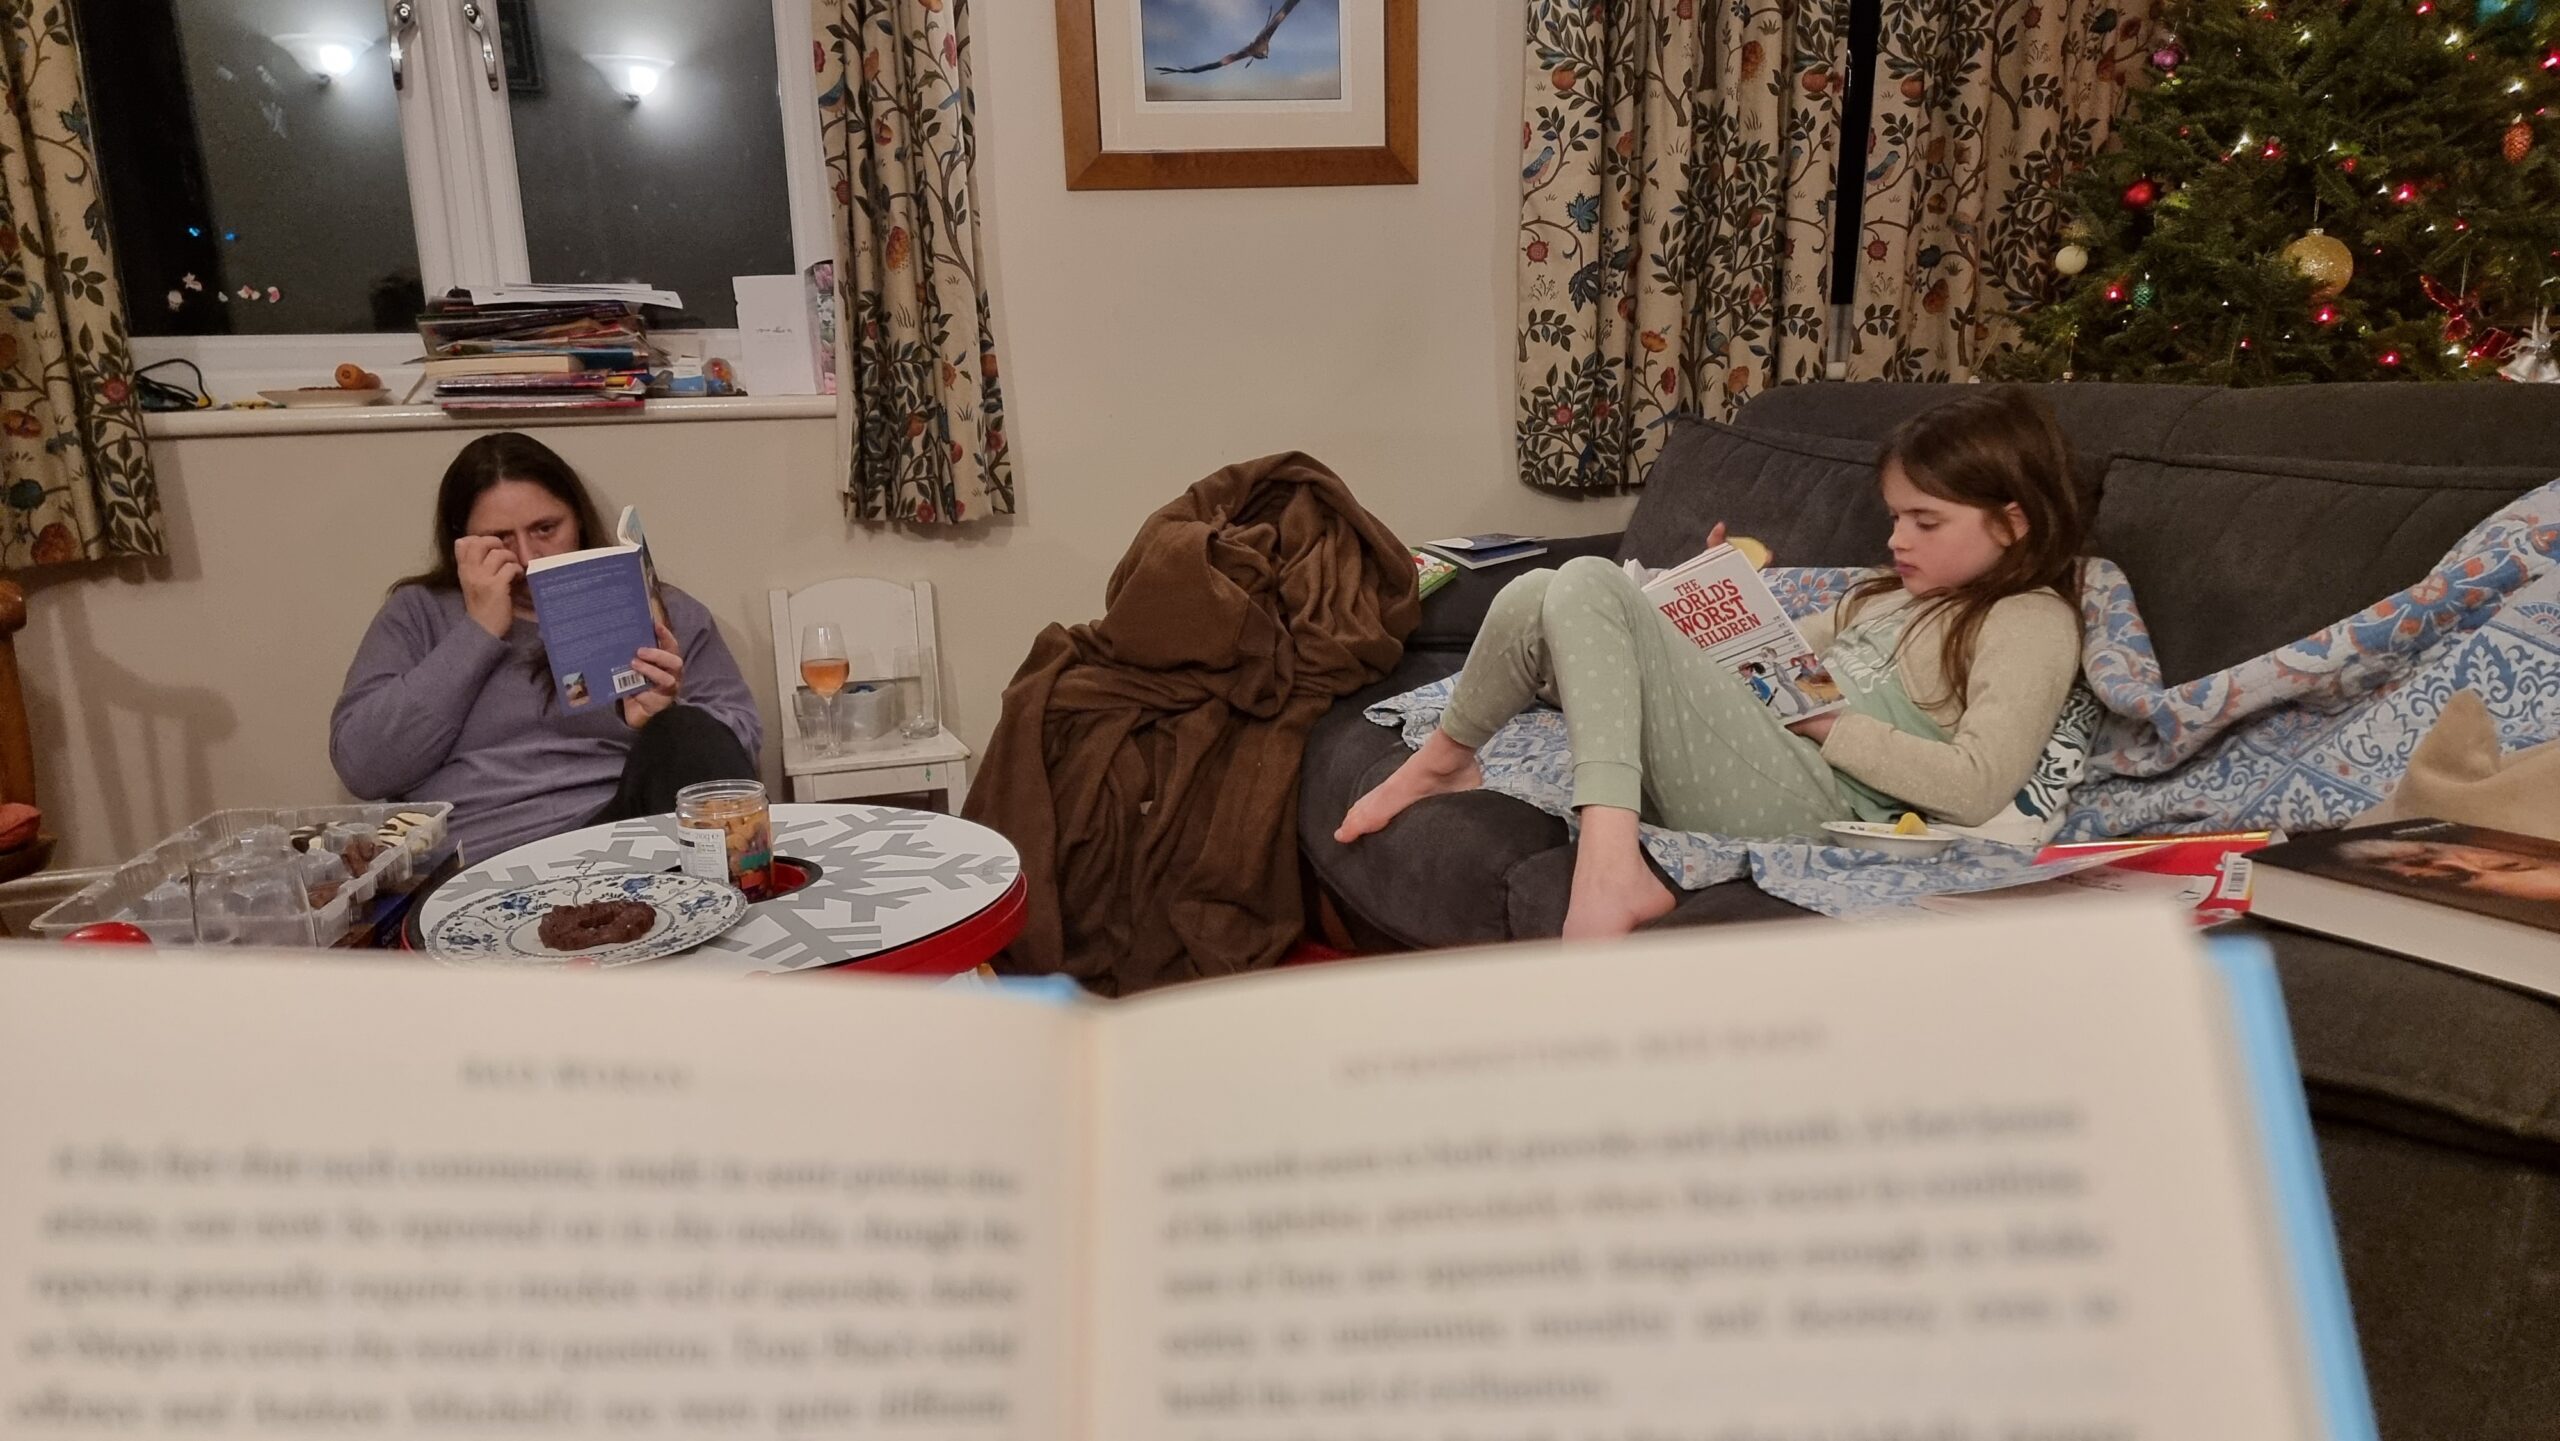 Family members read books in a living room, seen over the top of the pages of an (out of focus) book in the foreground.